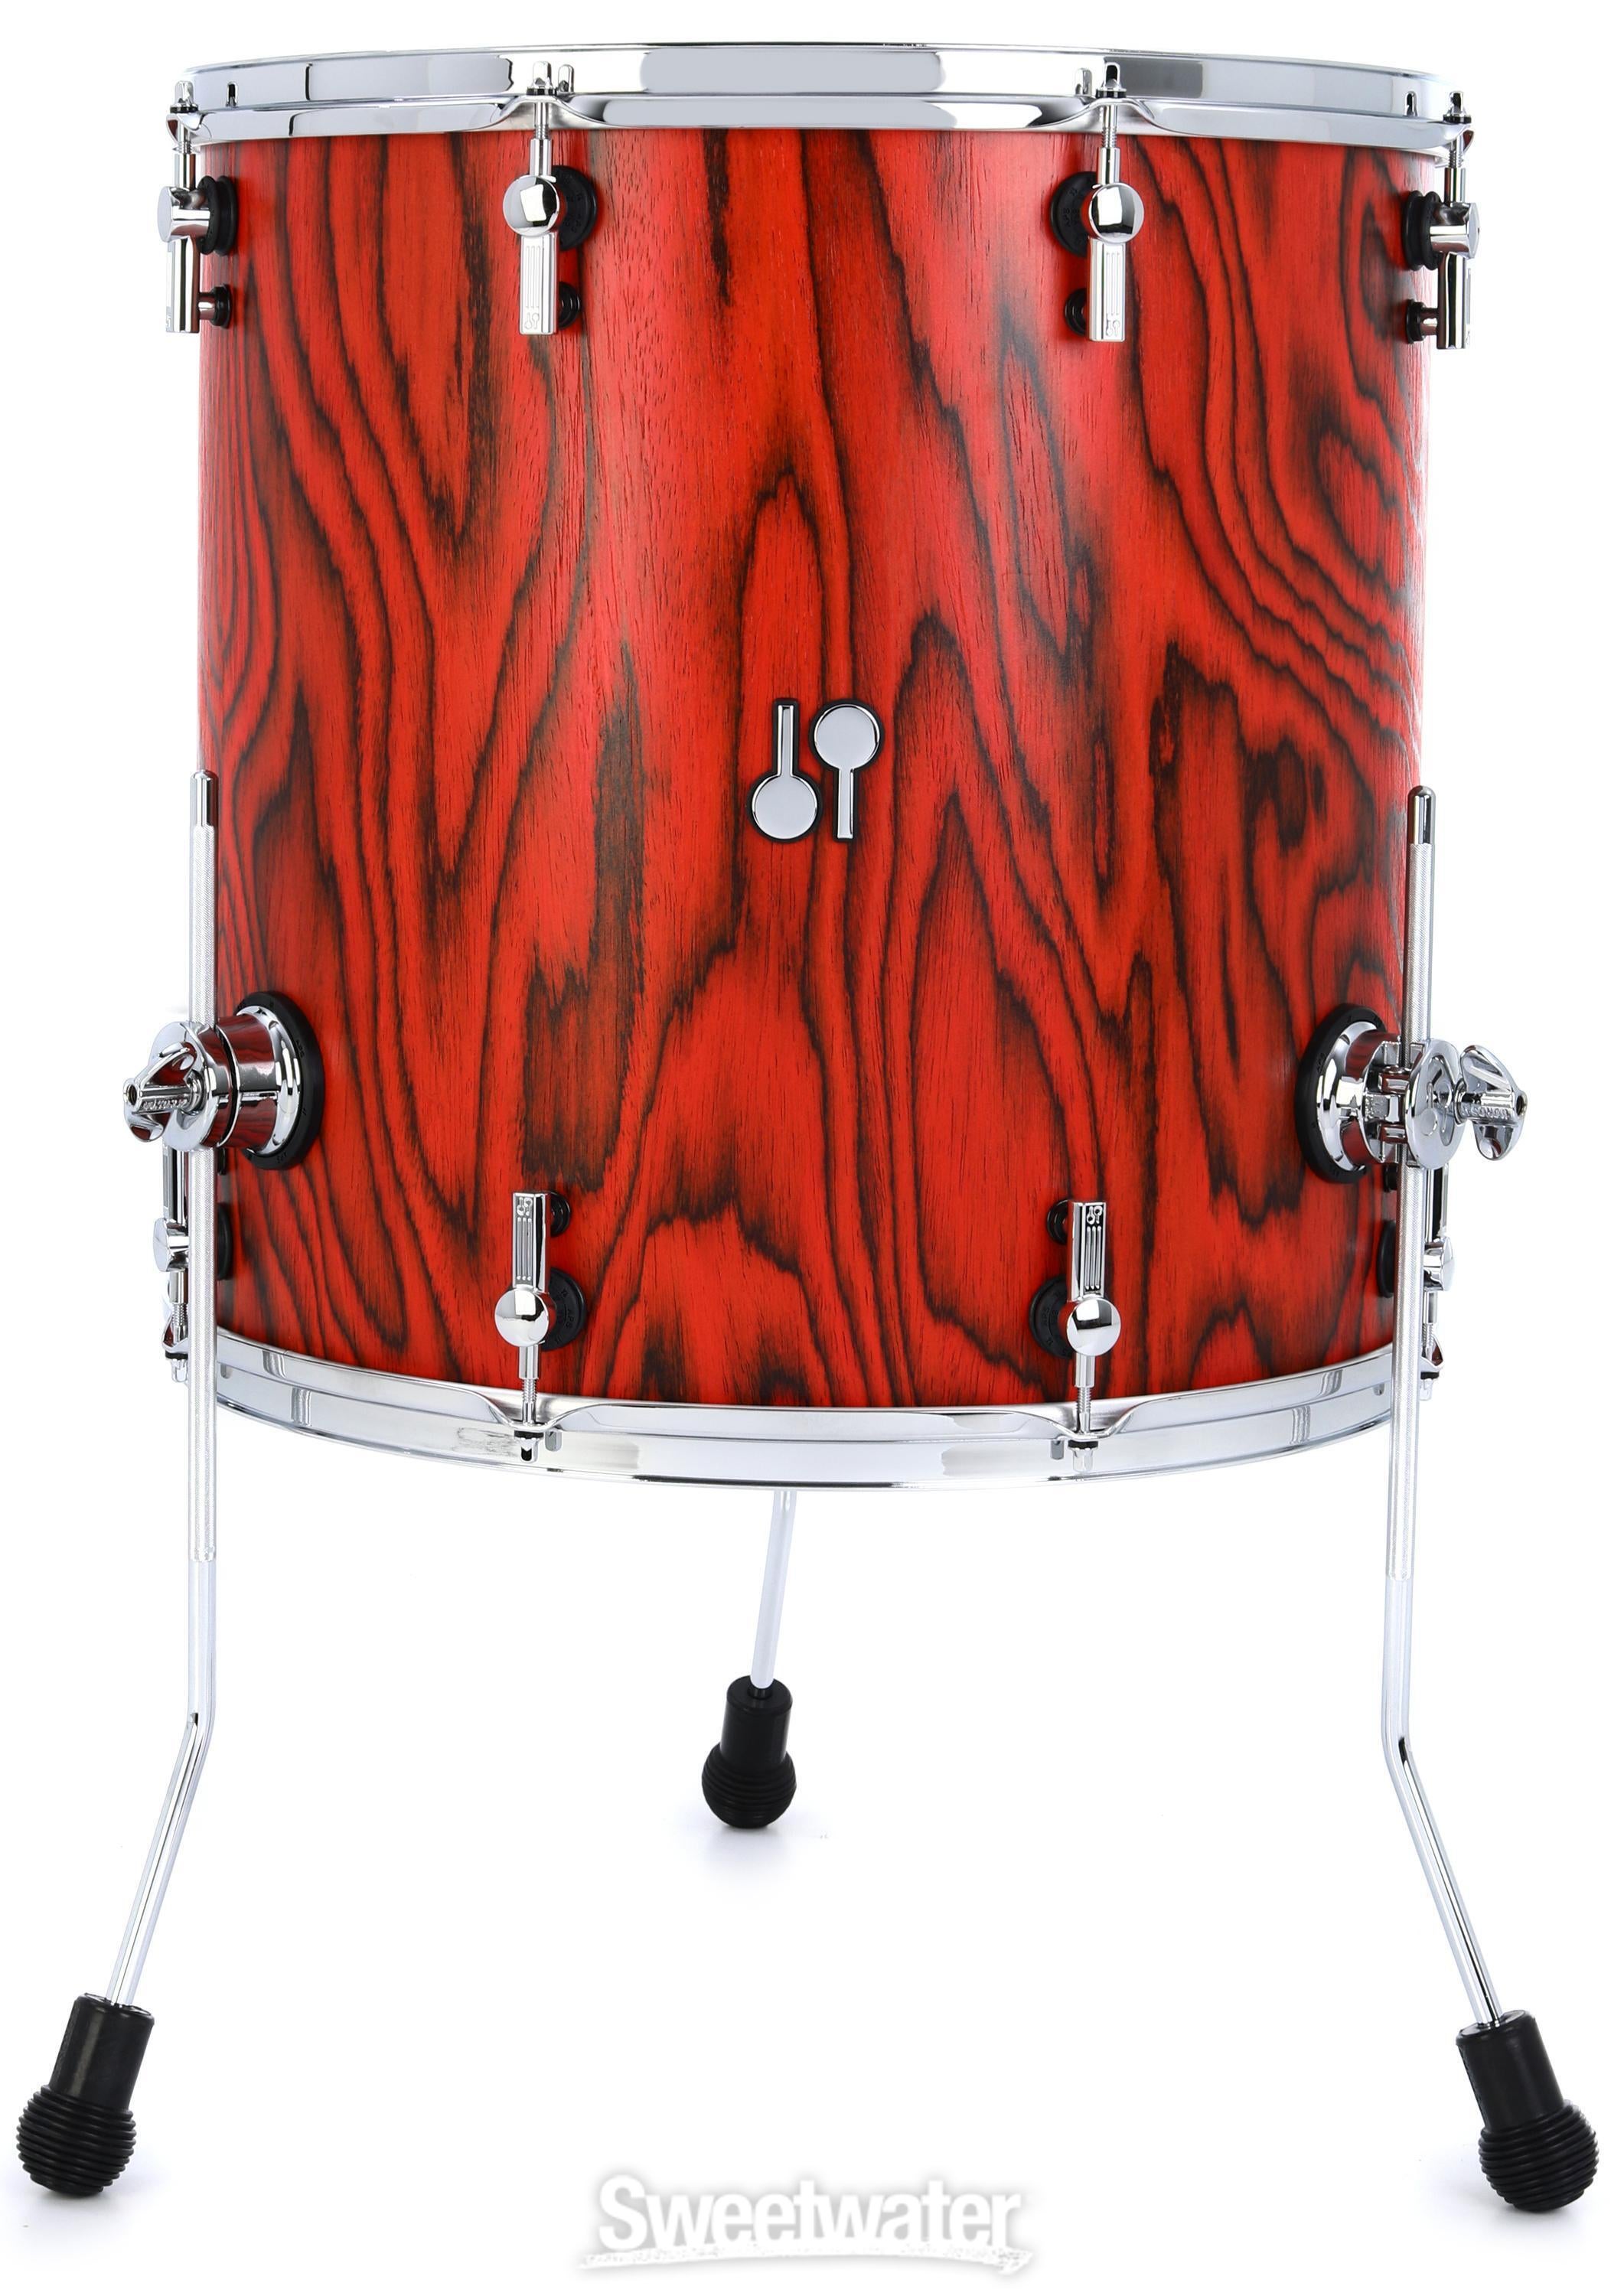 Sonor SQ2 Beech 4-piece Shell Pack - Fiery Red